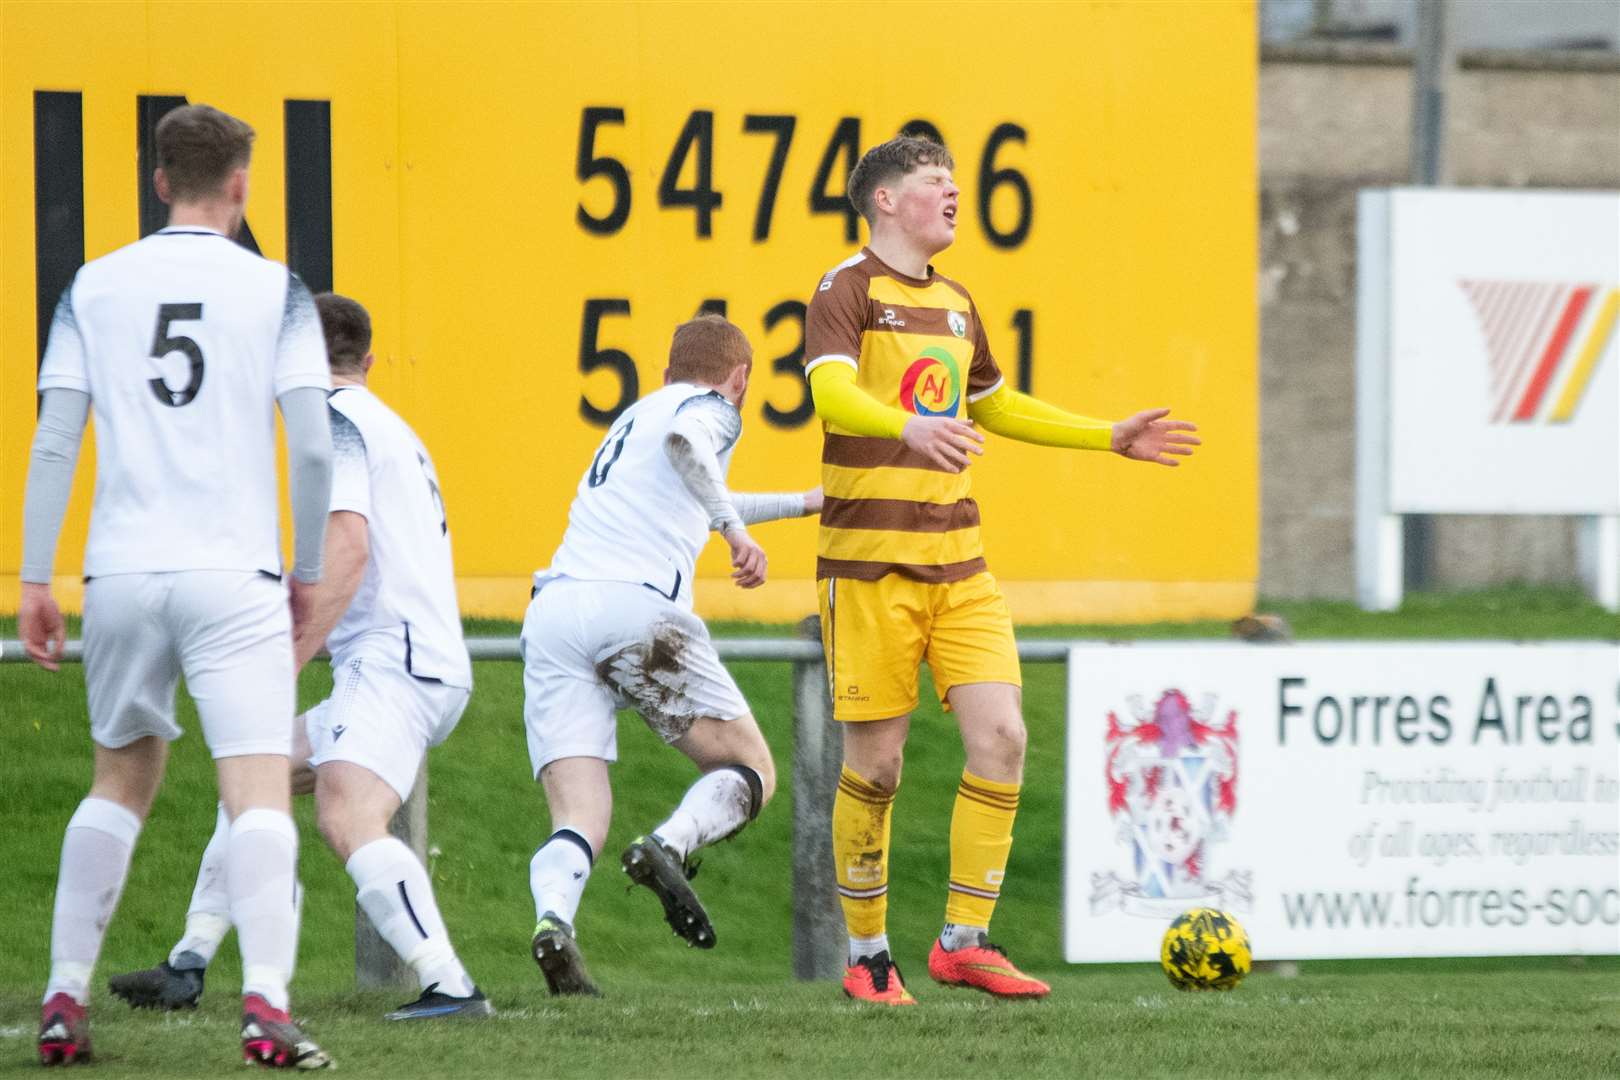 Forres Mechanics' forward Ethan Cairns after a missed chance for the home side. ..Forres Mechanics FC (0) vs Rothes FC (1) - Highland Football League 23/24 - Mosset Park, Forres 25/11/2023...Picture: Daniel Forsyth..